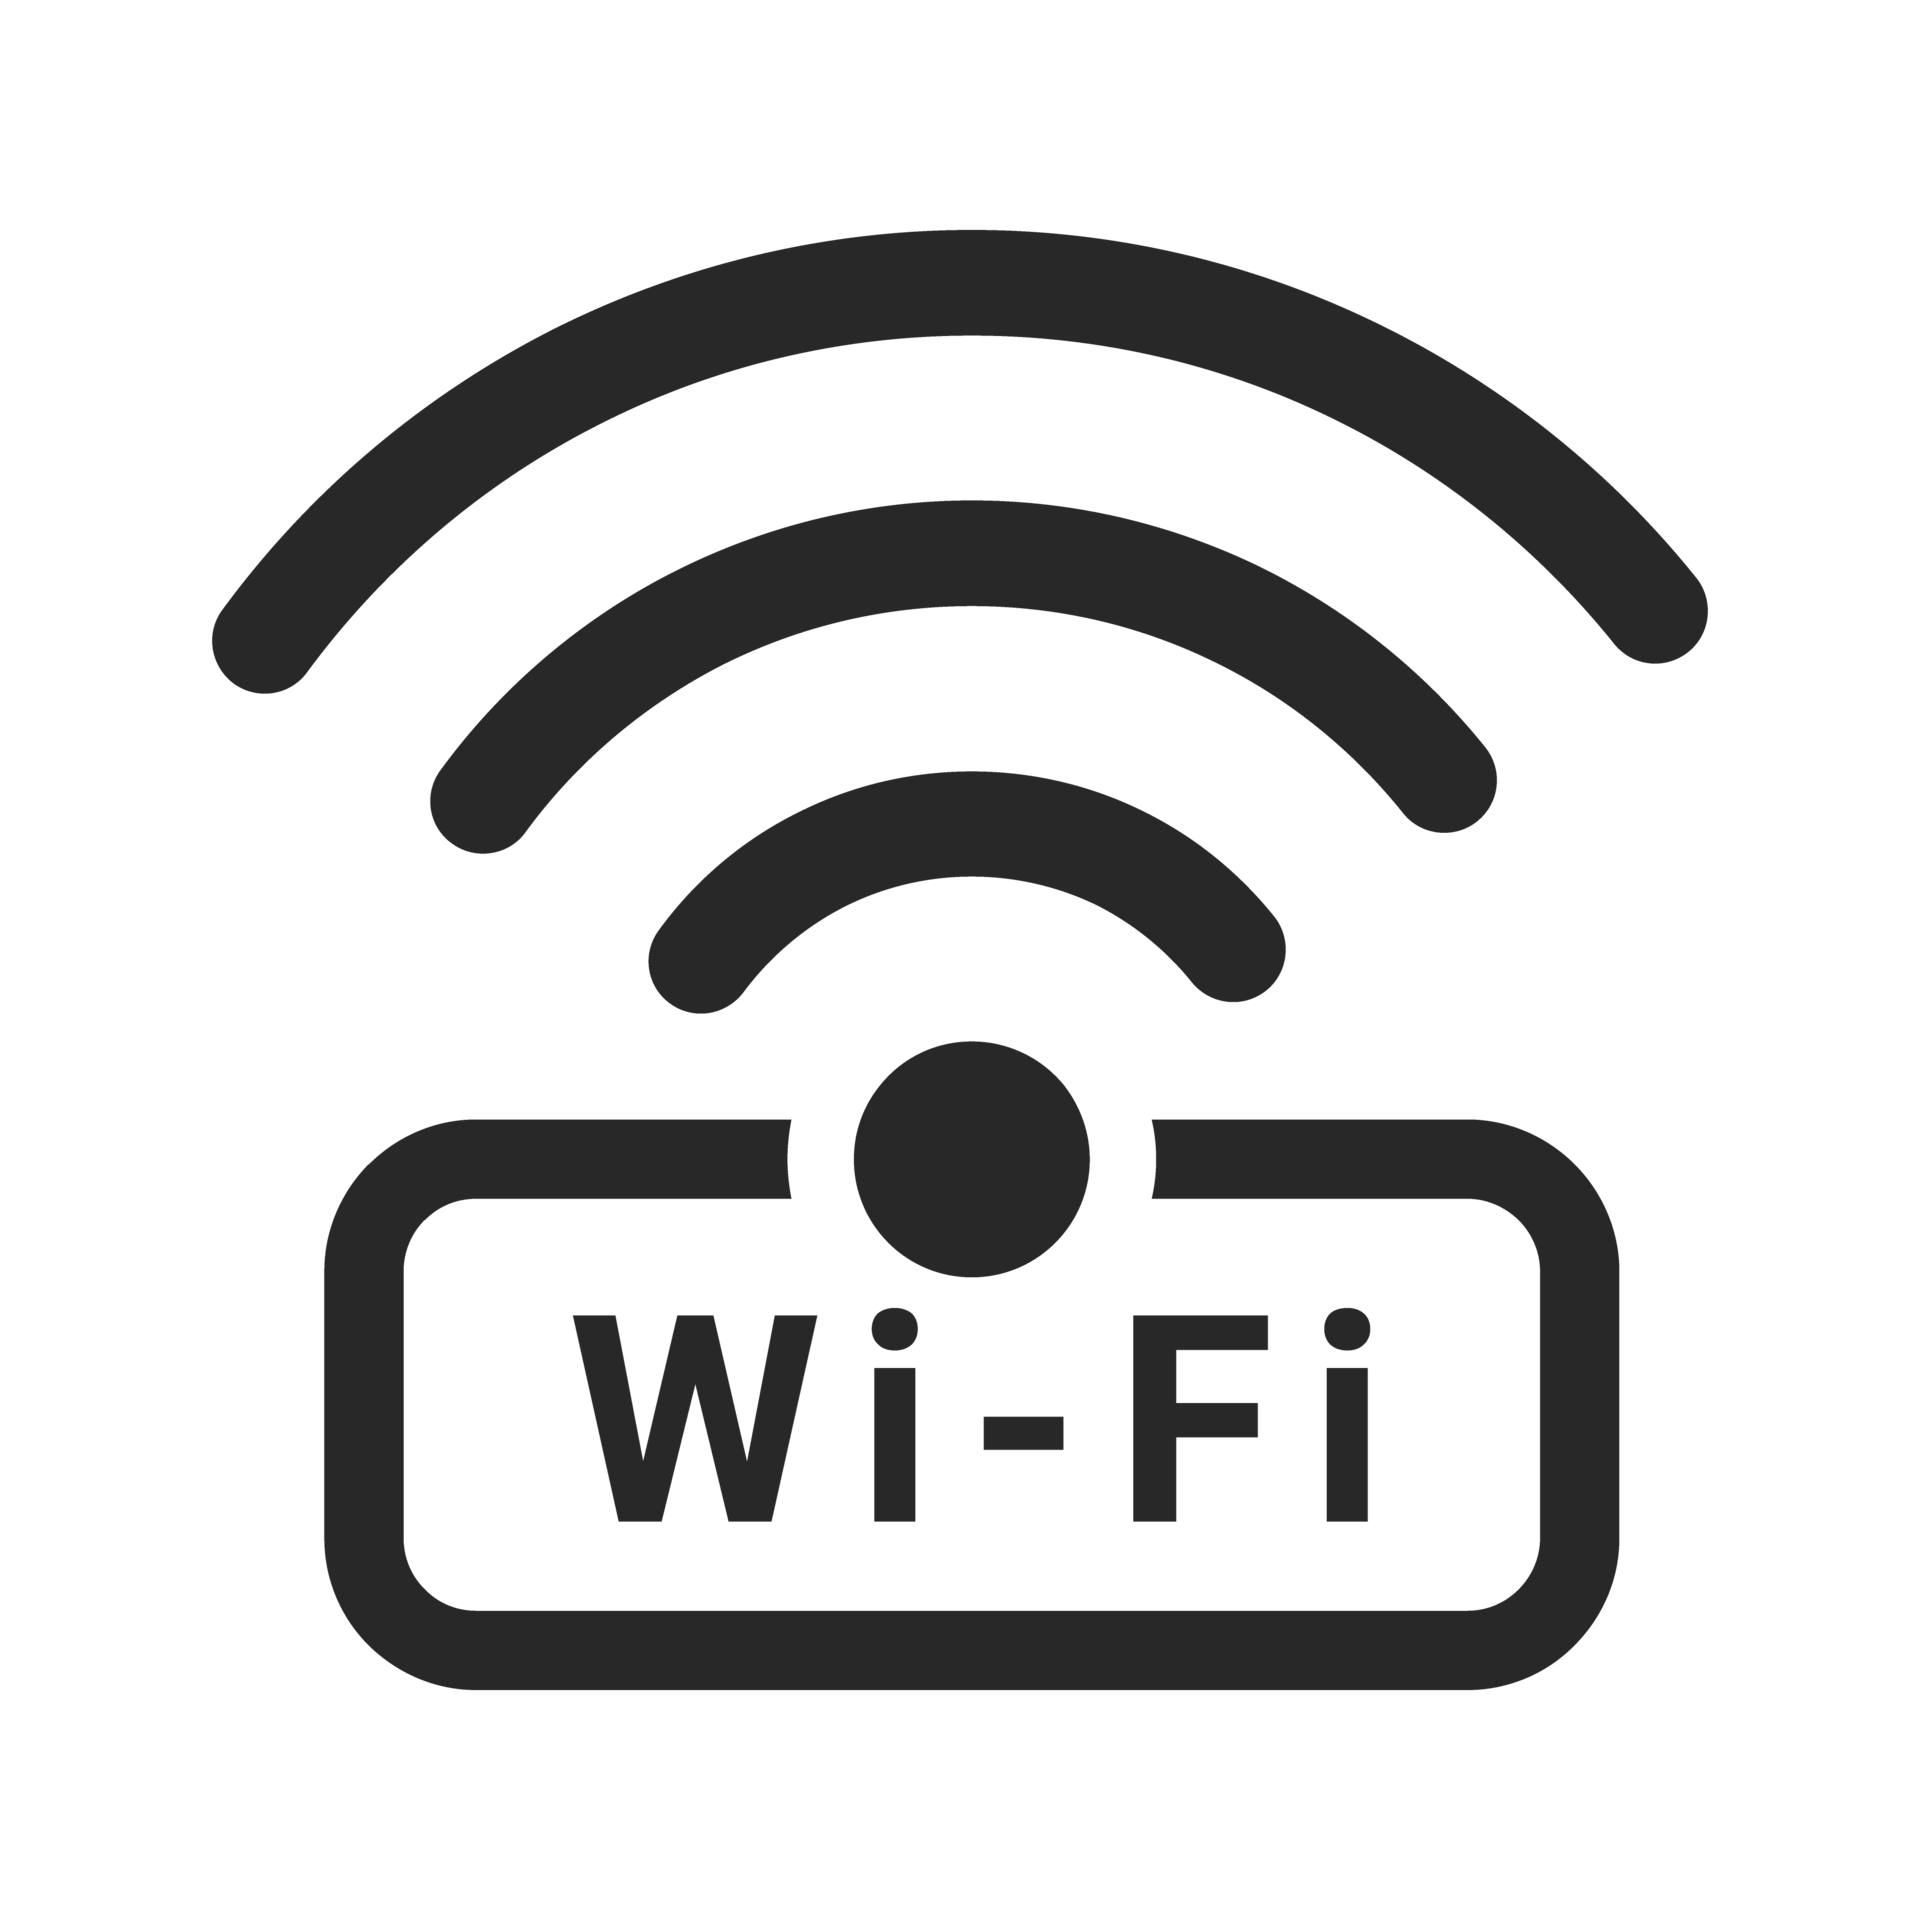 Wifi Hotspot Png Free Download 21250225 Png